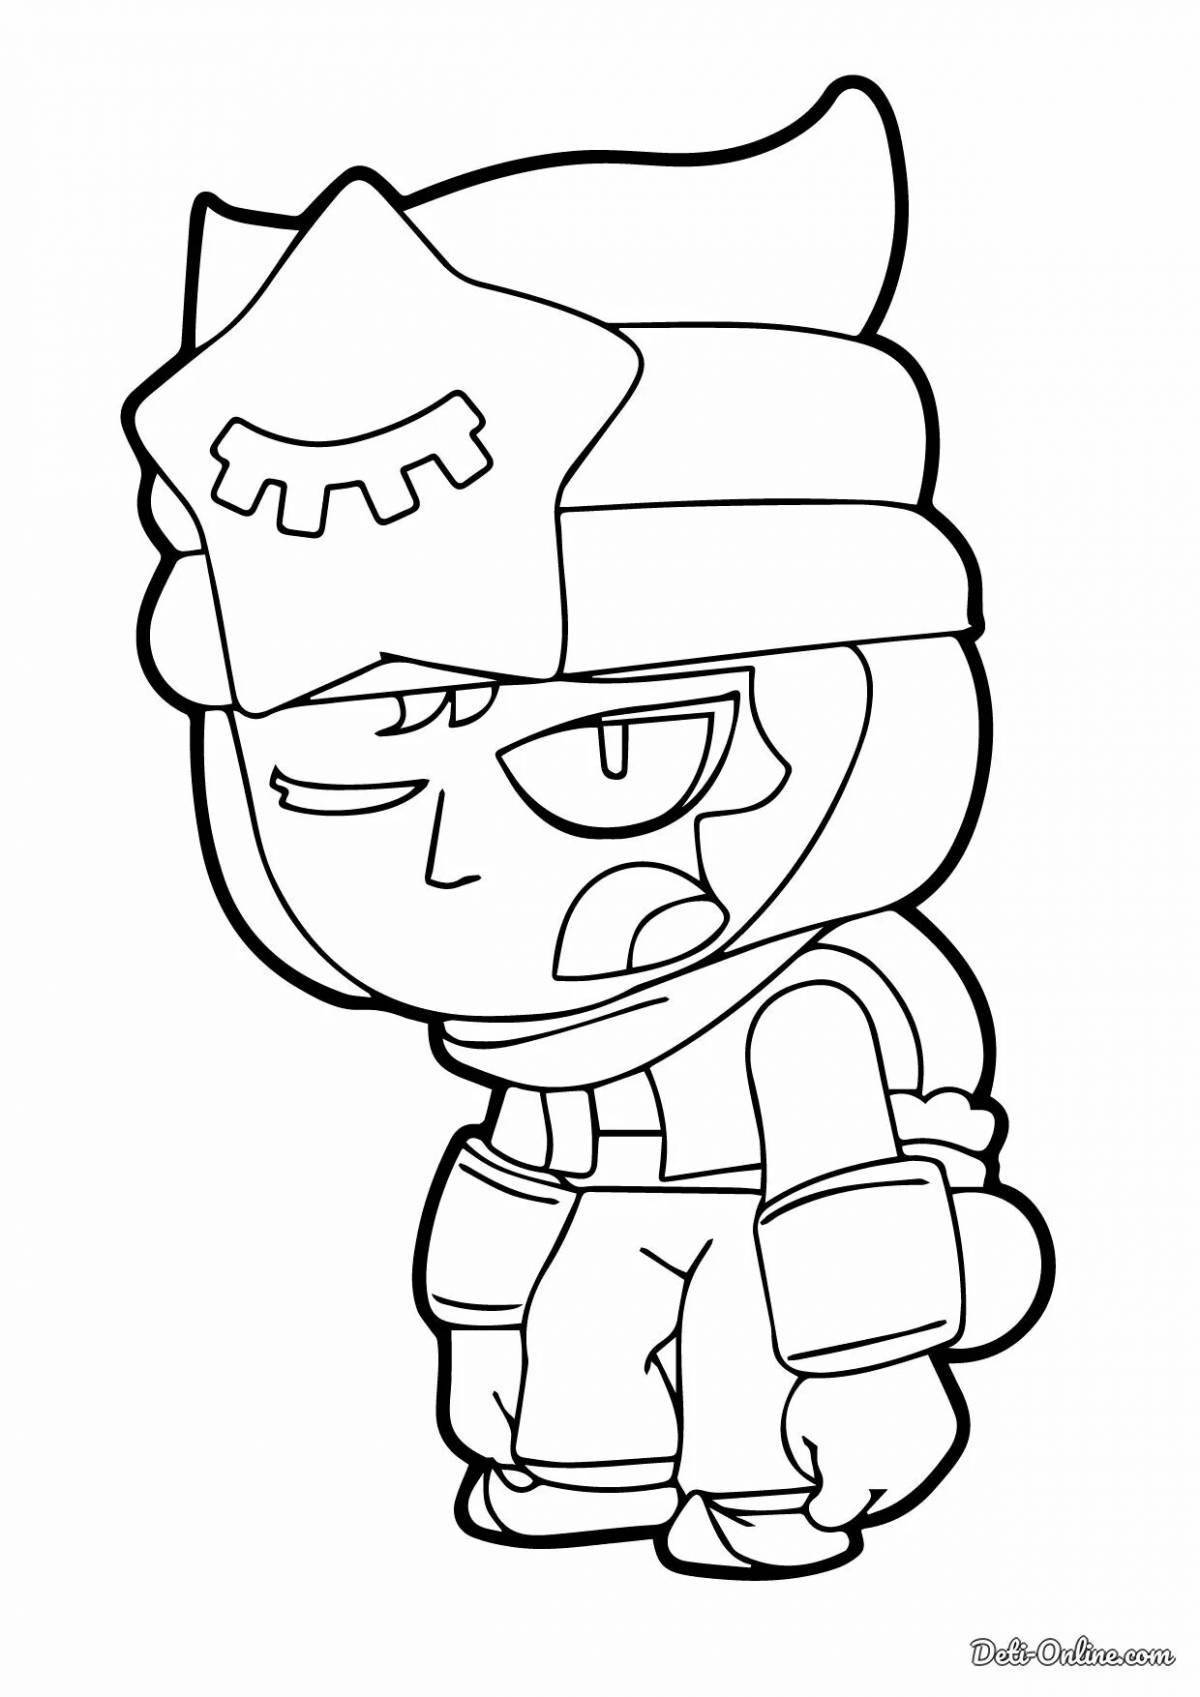 Adorable brawler icons coloring page